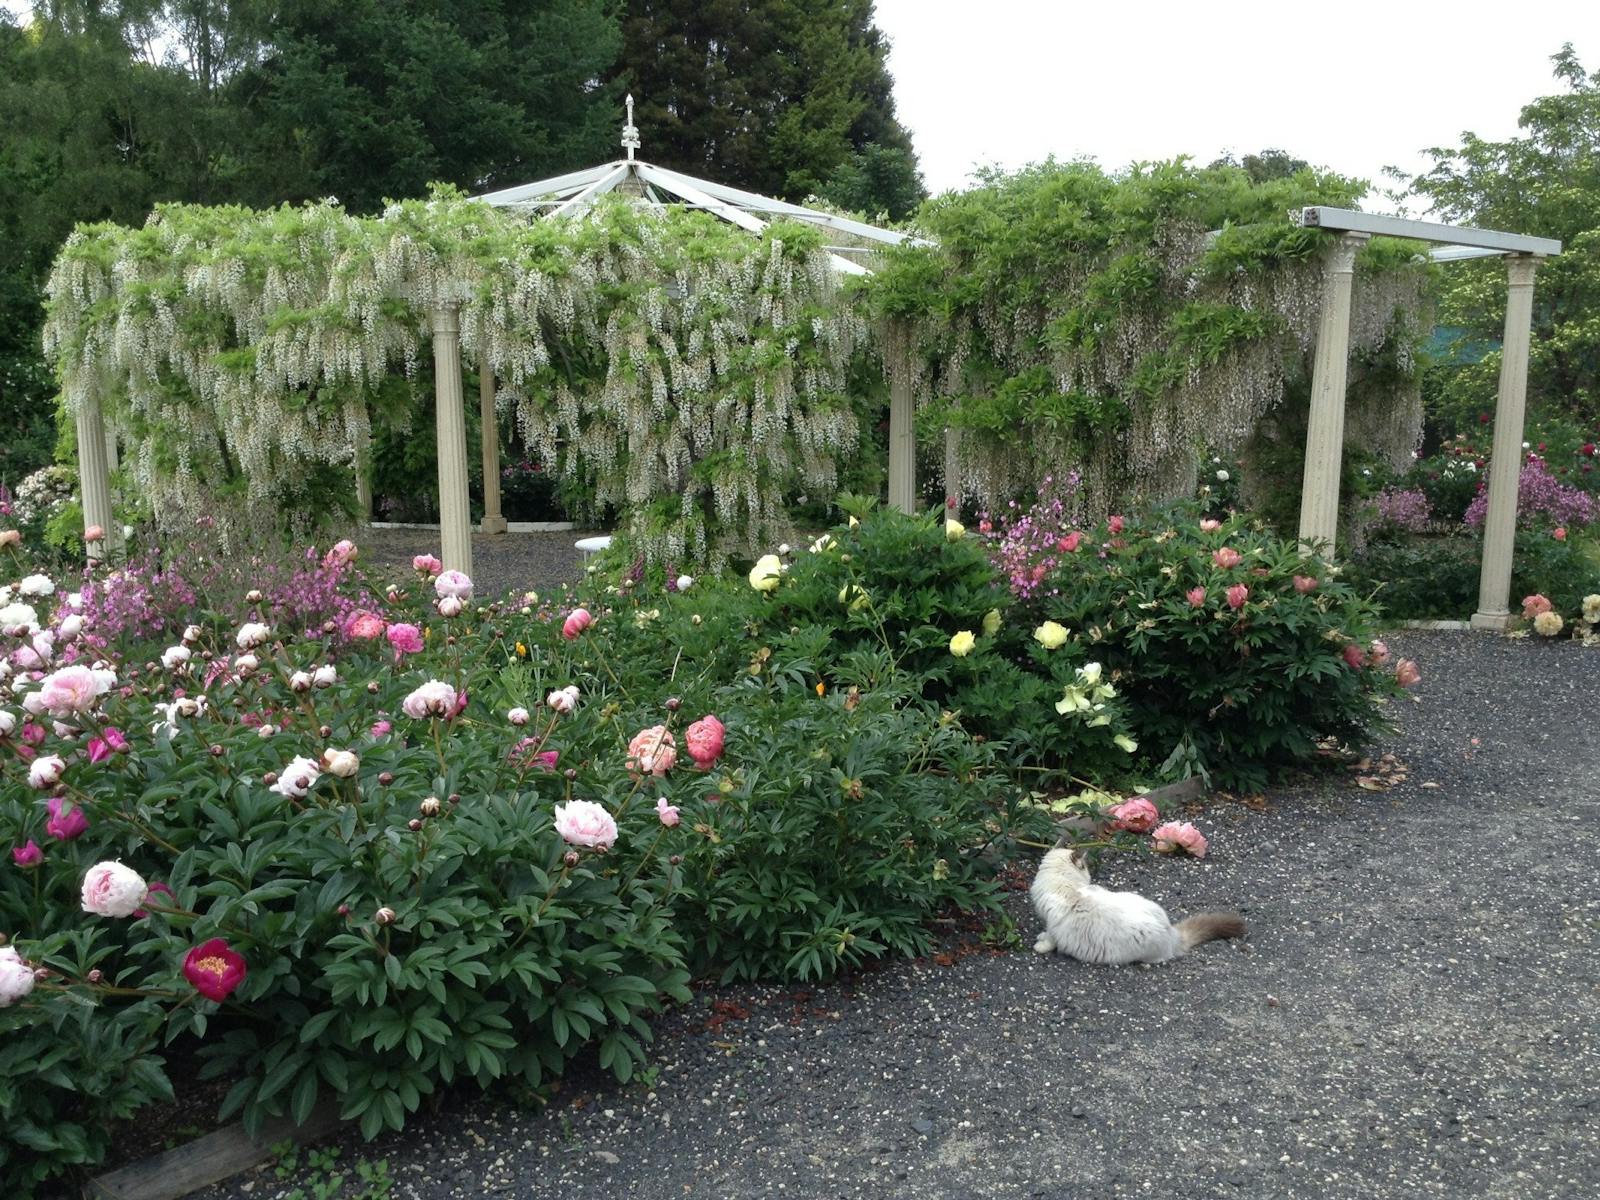 Peonies and Wisteria Pavilion in December